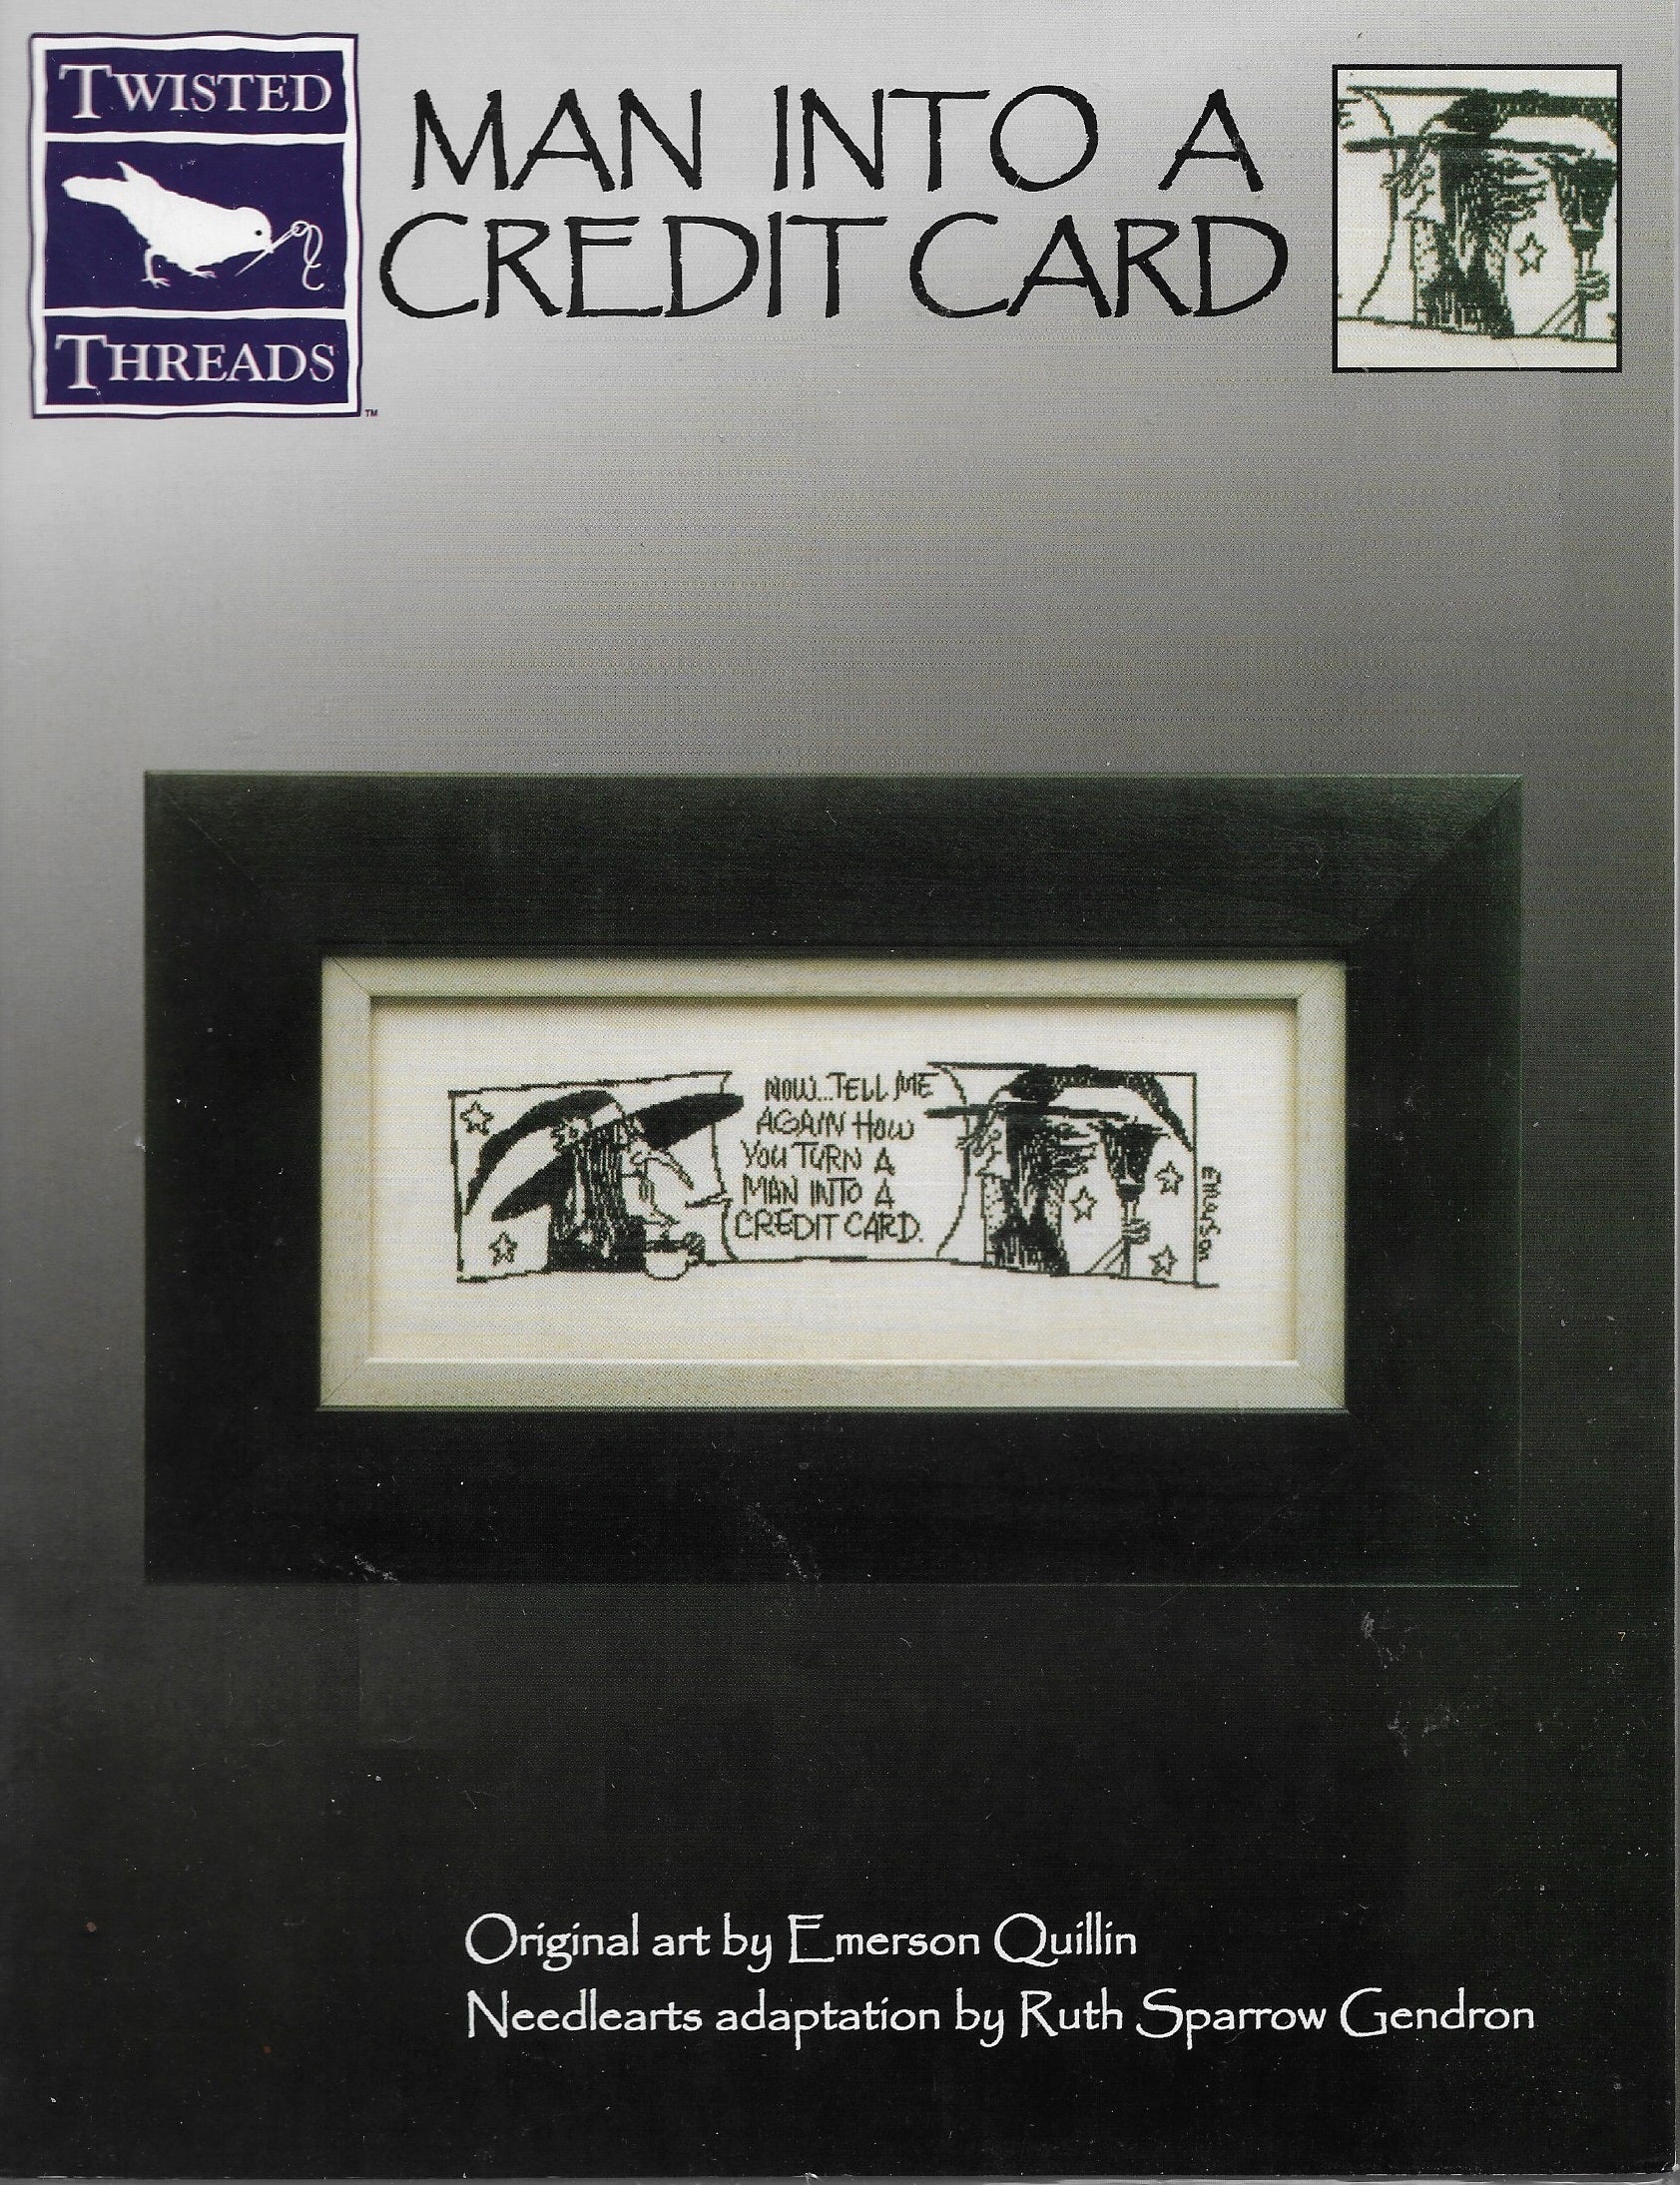 Twisted Threads Man into a credit card cross stitch pattern